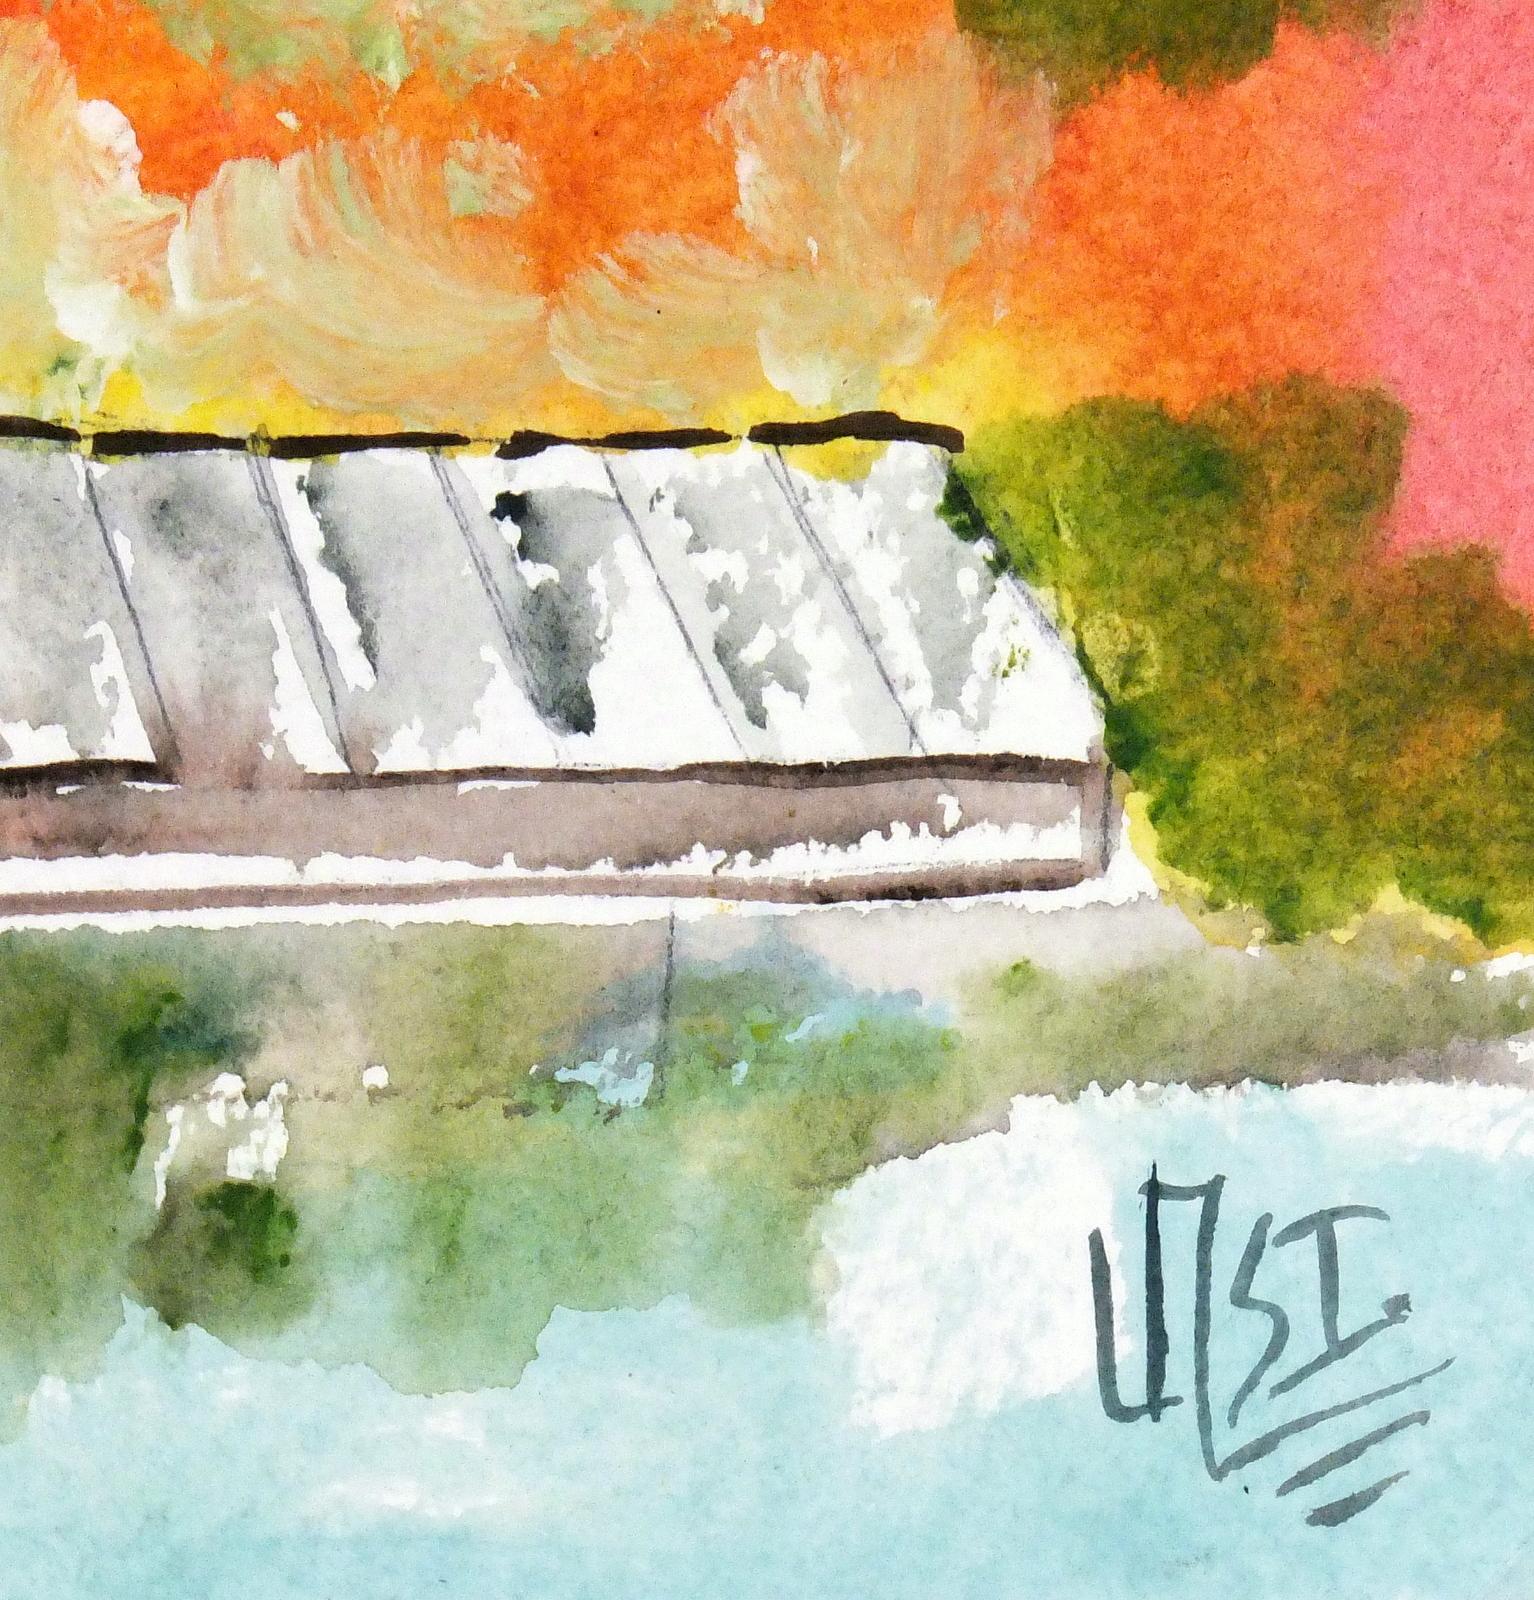 Vibrant Mexican Watercolor Painting - The Boat Dock - Art by Armando Sanchez